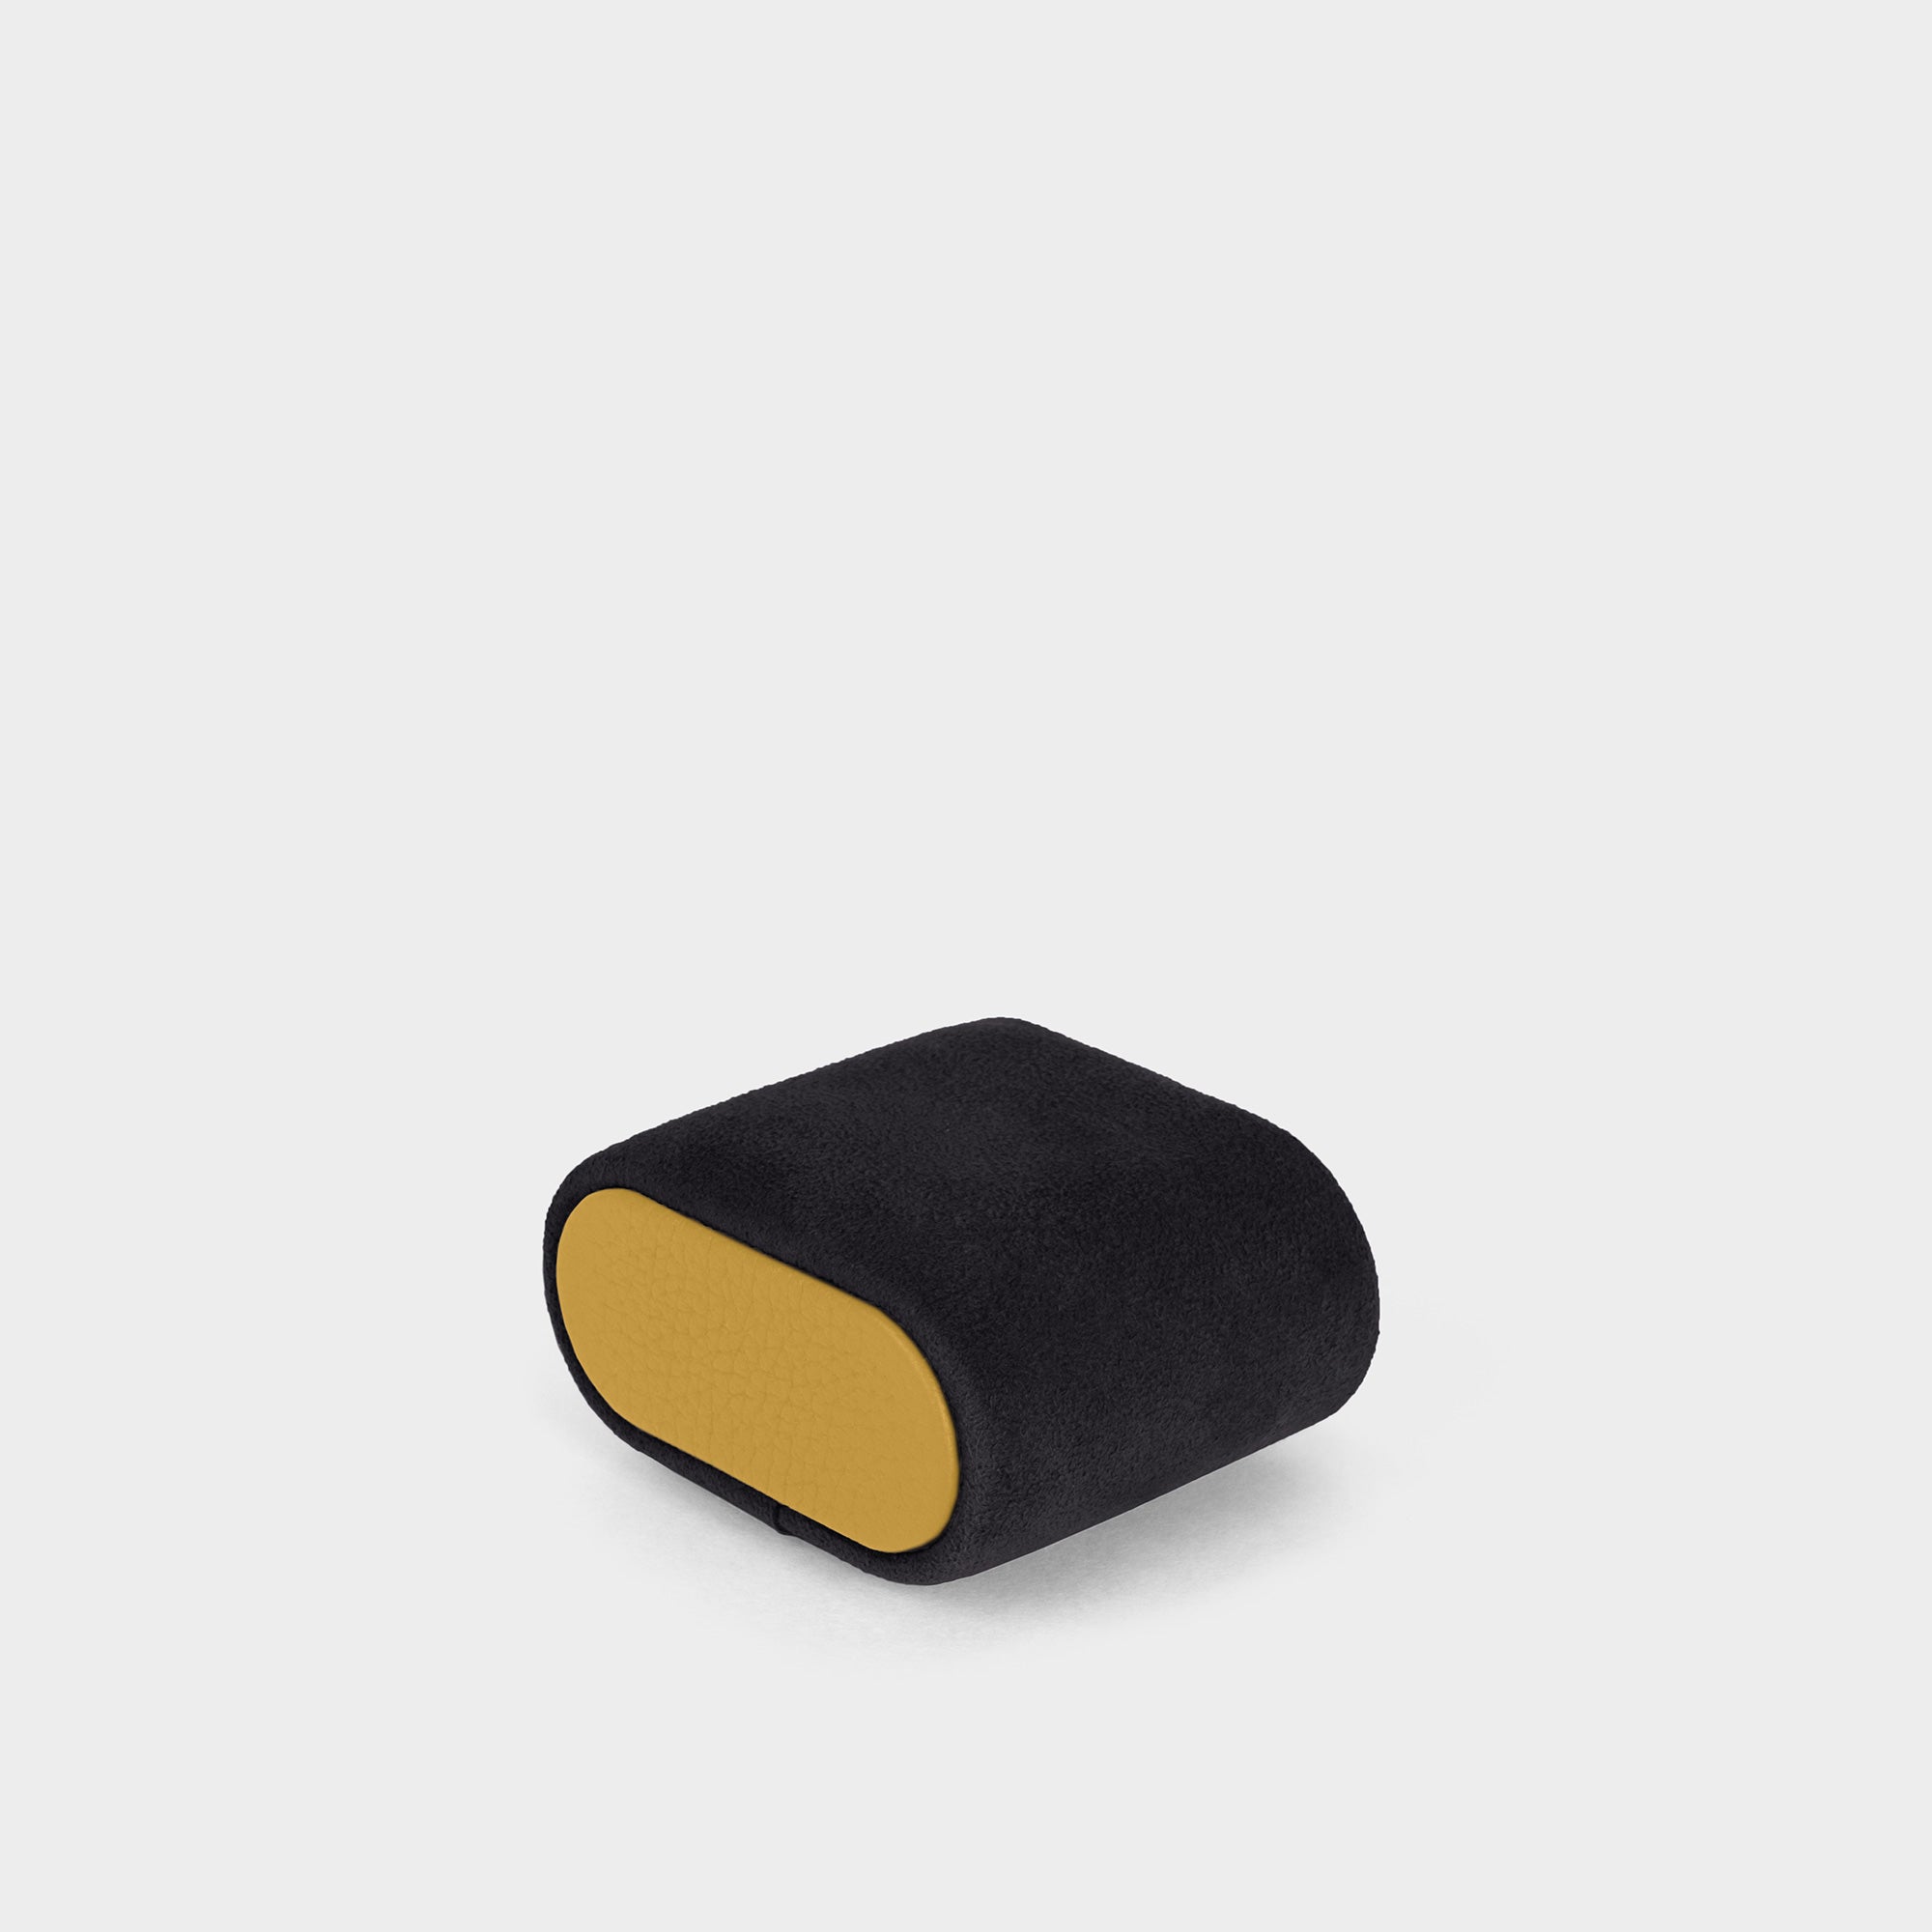 Soft Alcantara cushion with contrasting sunflower leather accents